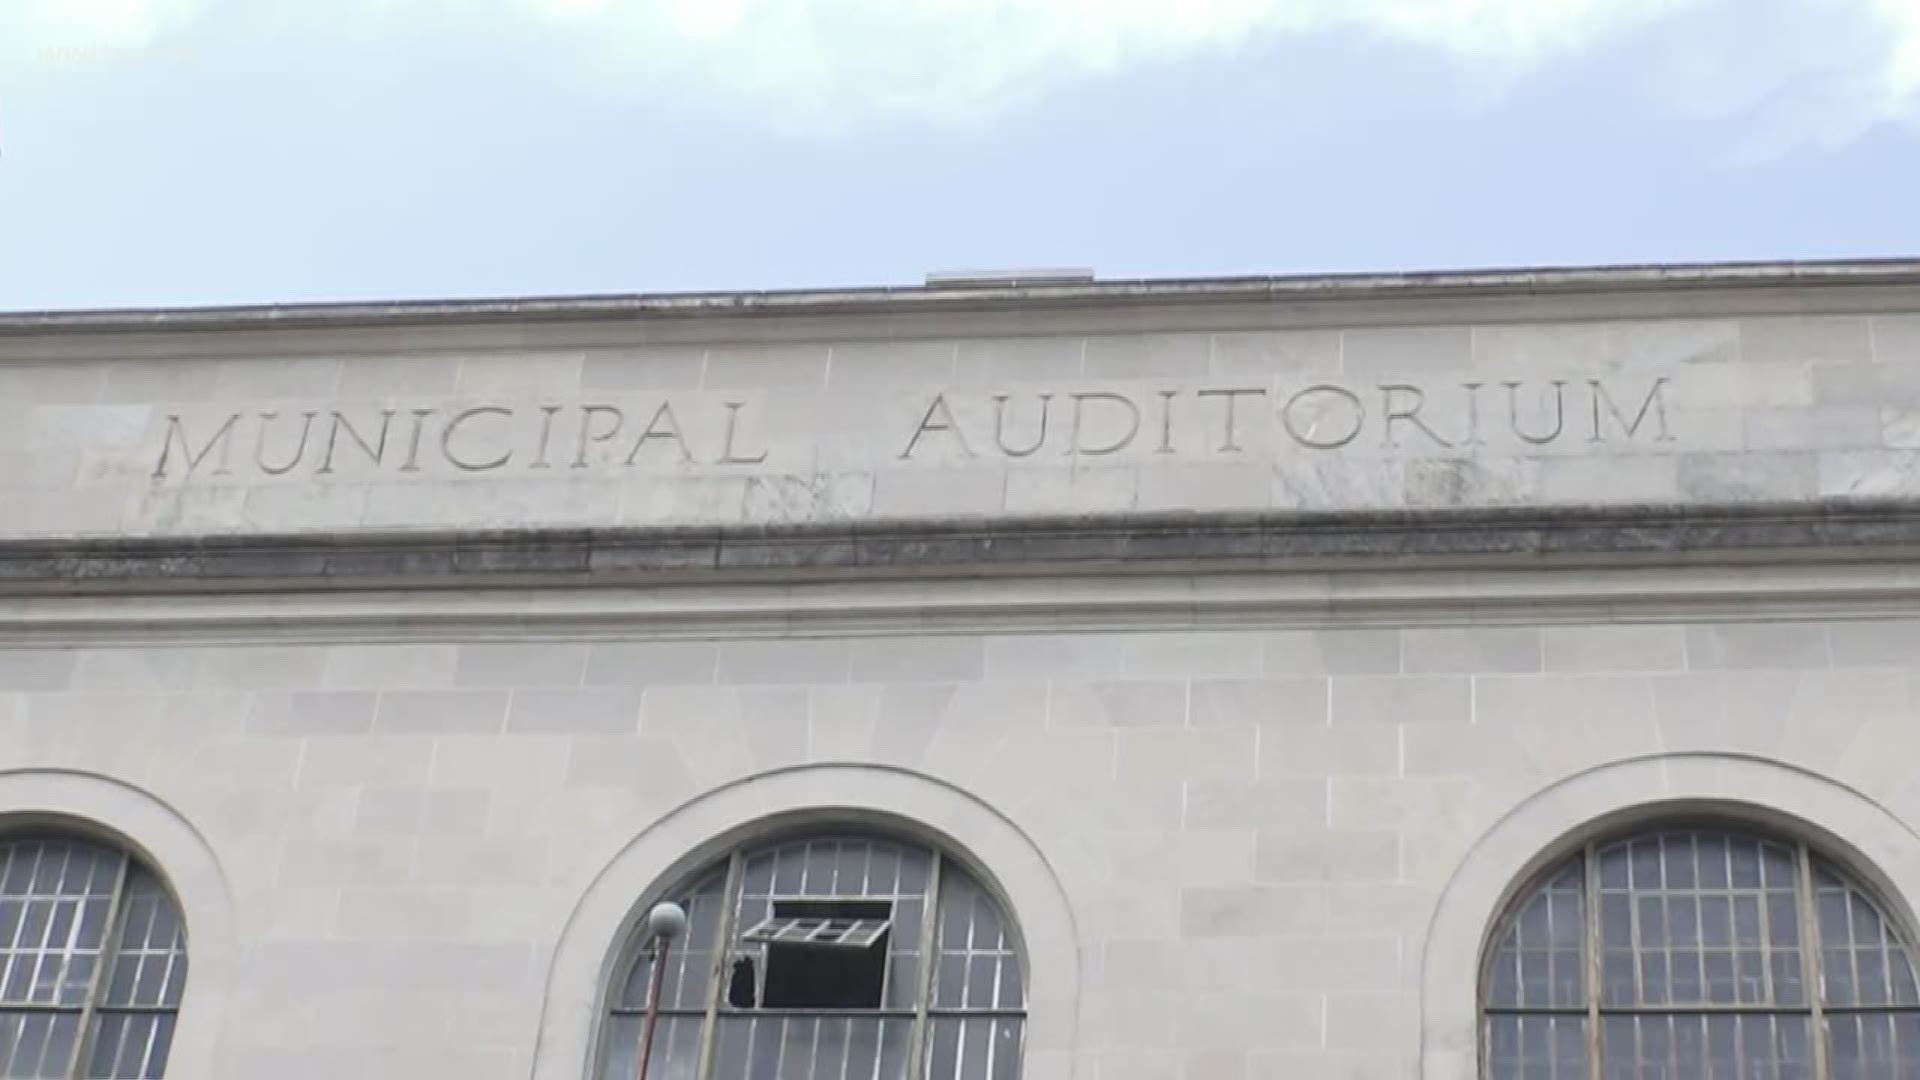 One of the buildings that has been left in ruins since Hurricane Katrina, the Municipal Auditorium, could become the new city hall under a plan being suggested by Mayor LaToya Cantrell. 